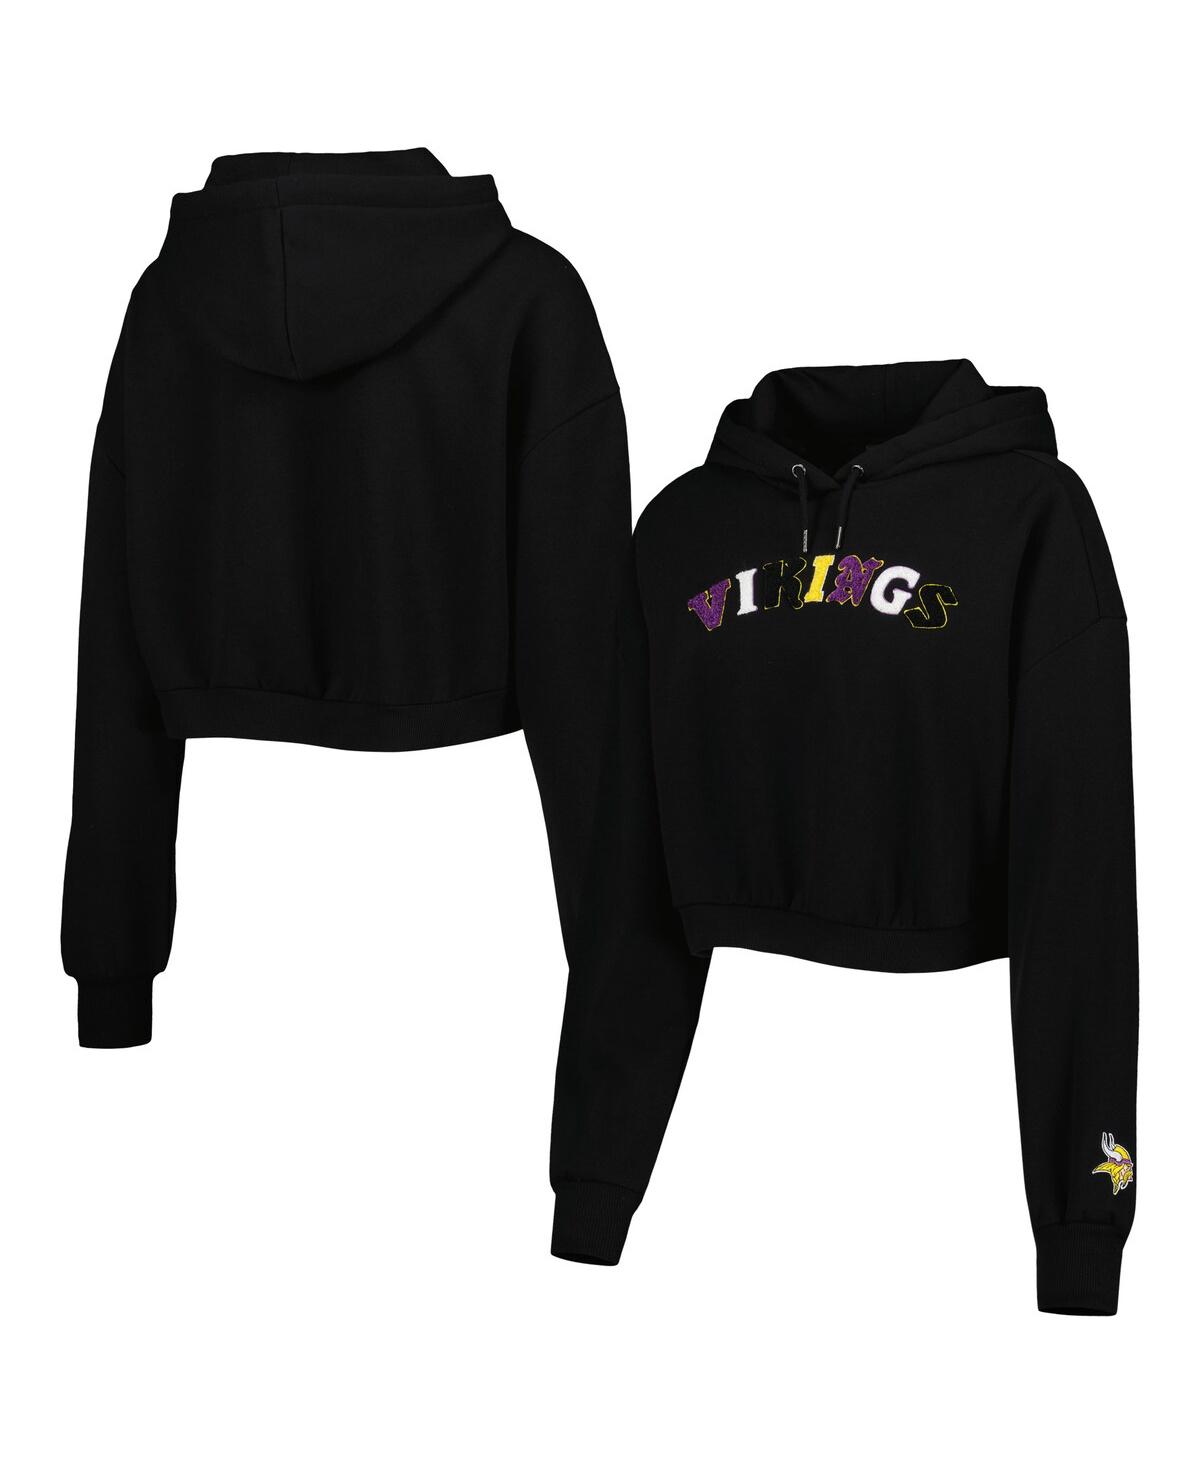 Women's The Wild Collective Black Minnesota Vikings Cropped Pullover Hoodie - Black